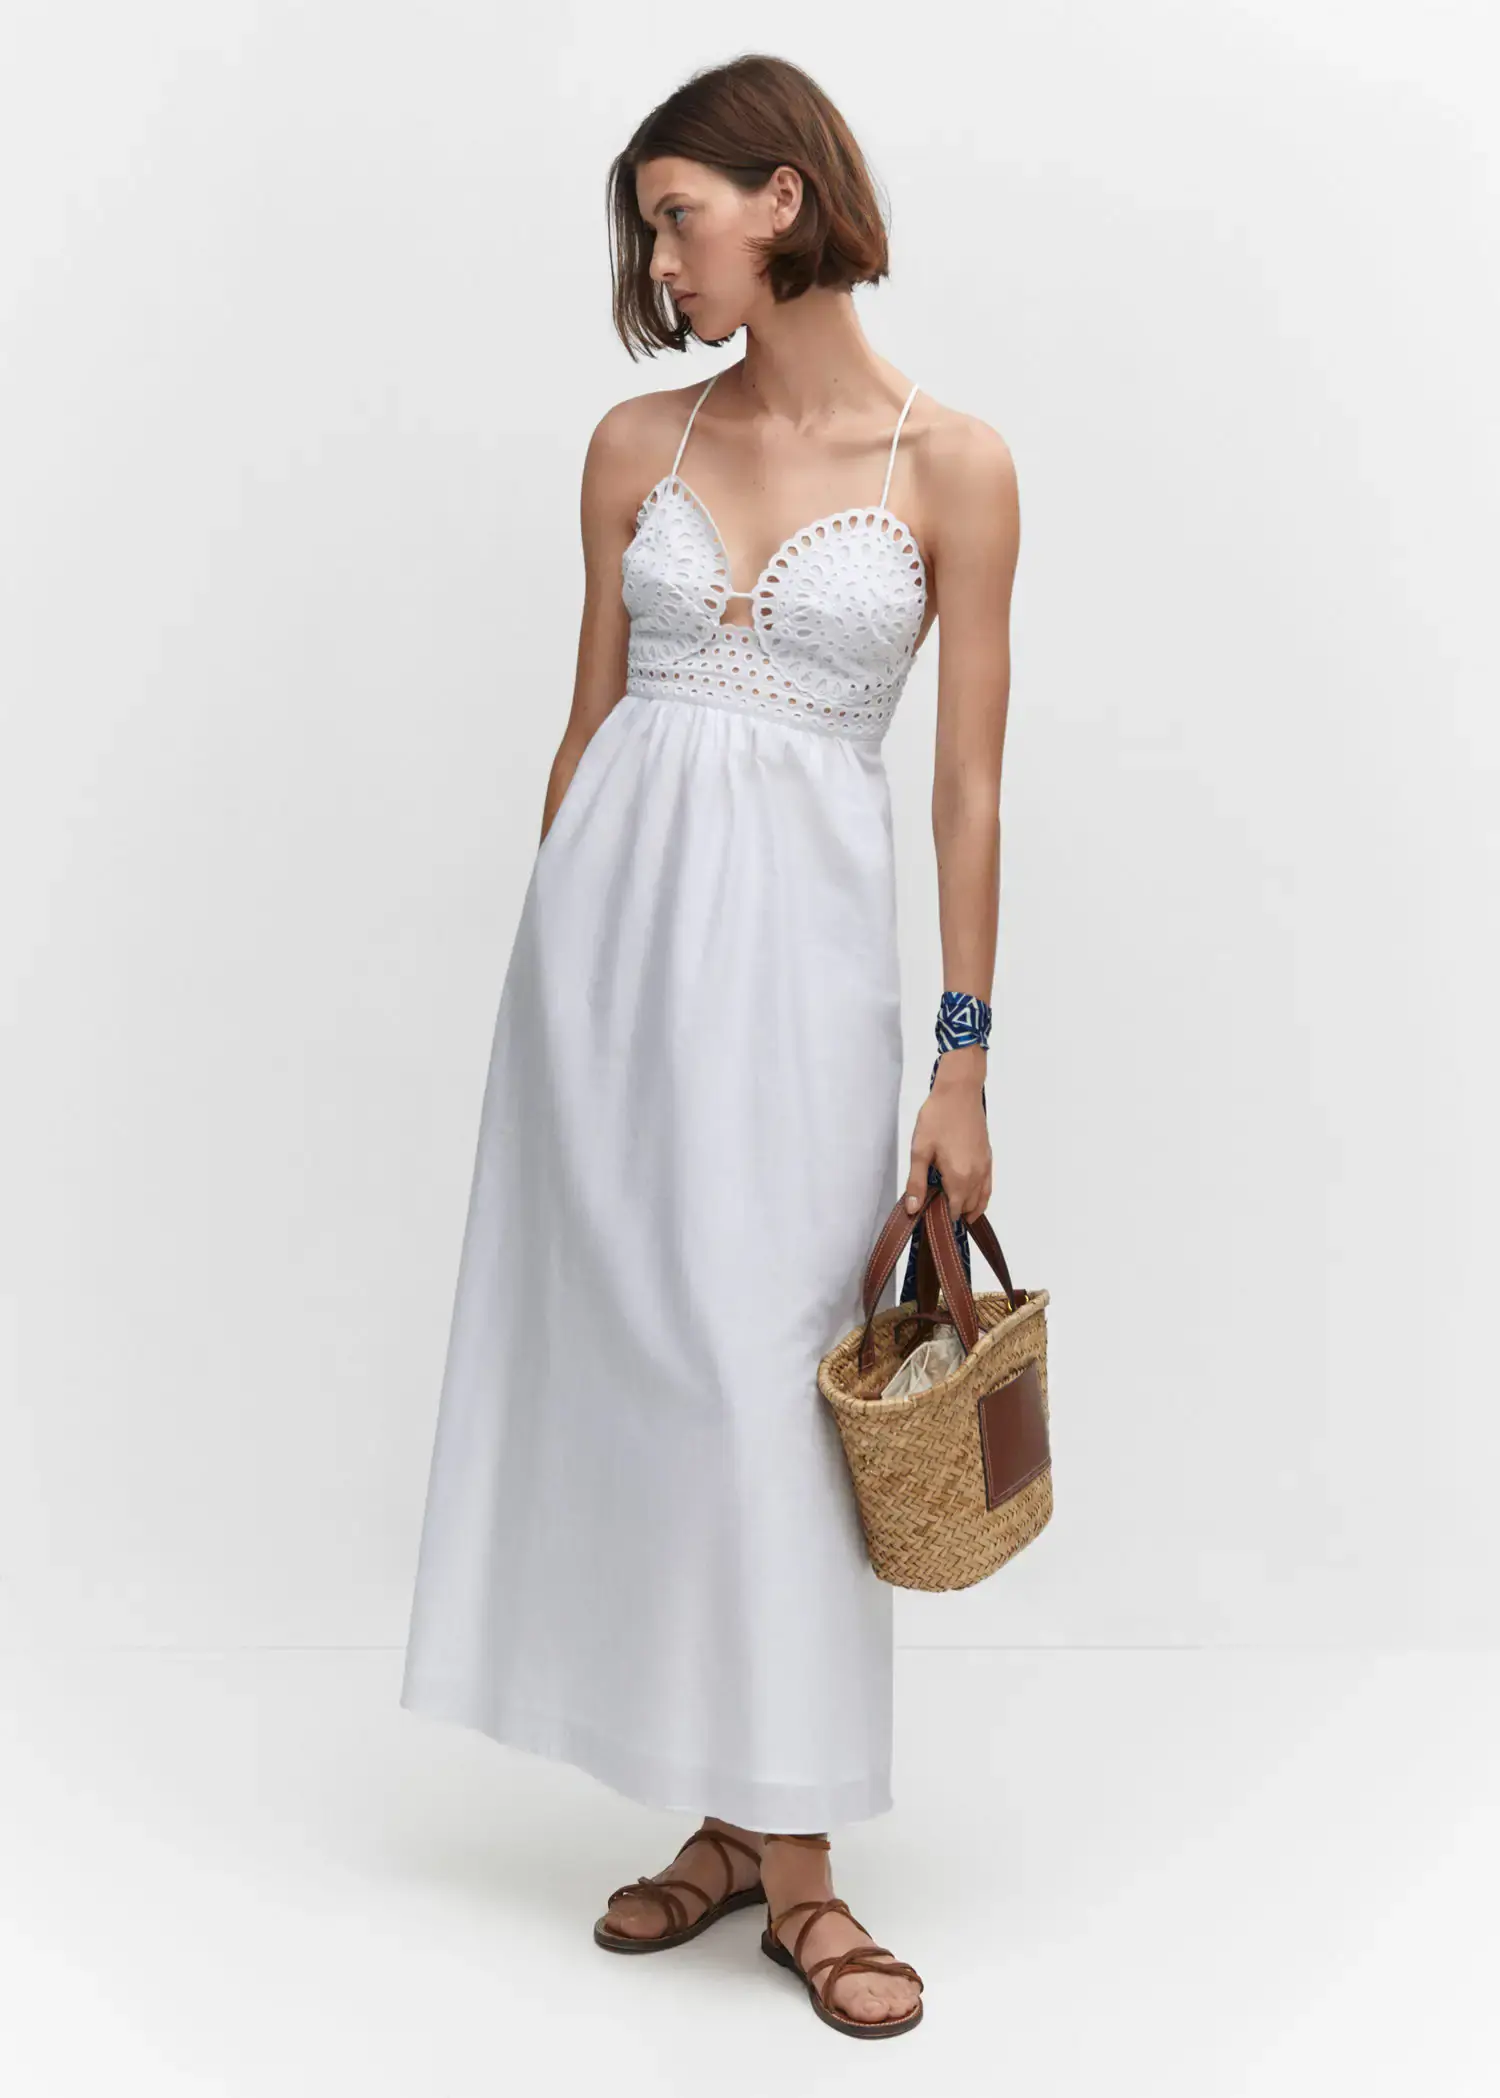 Mango Embroidered v-neckline dress. a woman in a white dress holding a straw bag. 